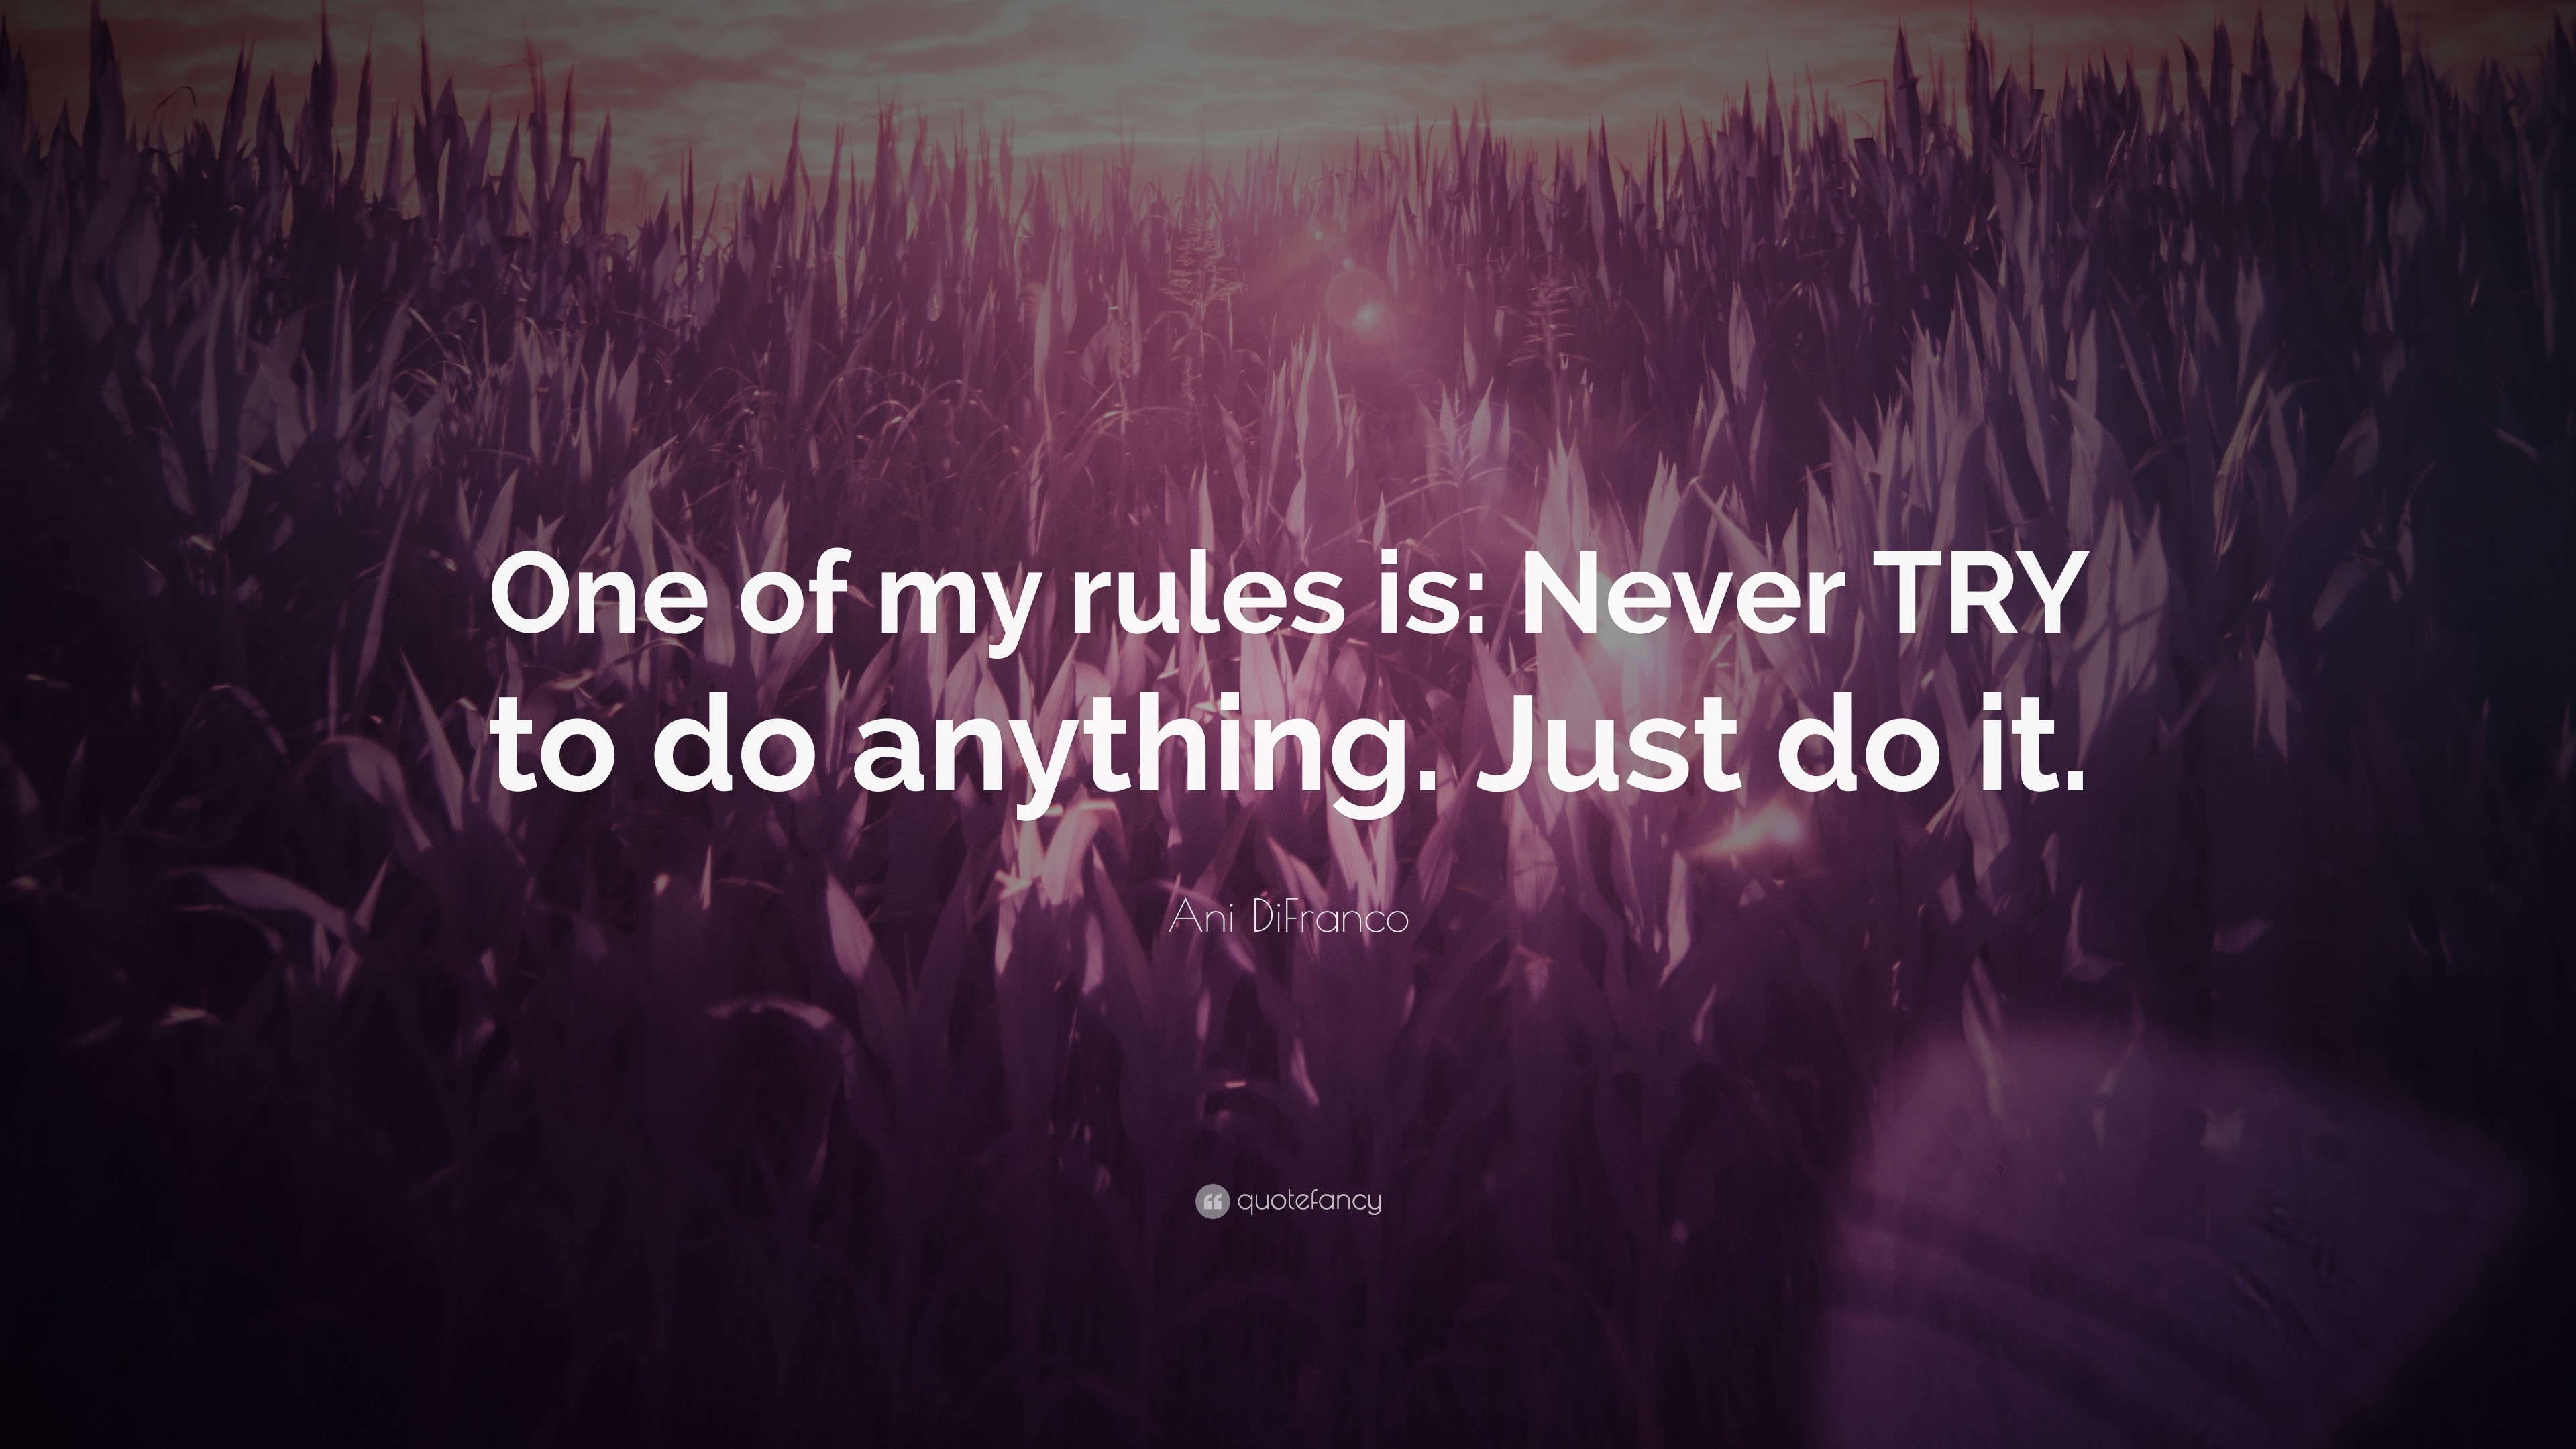 QUOTES OF MY LIFE MY RULES –